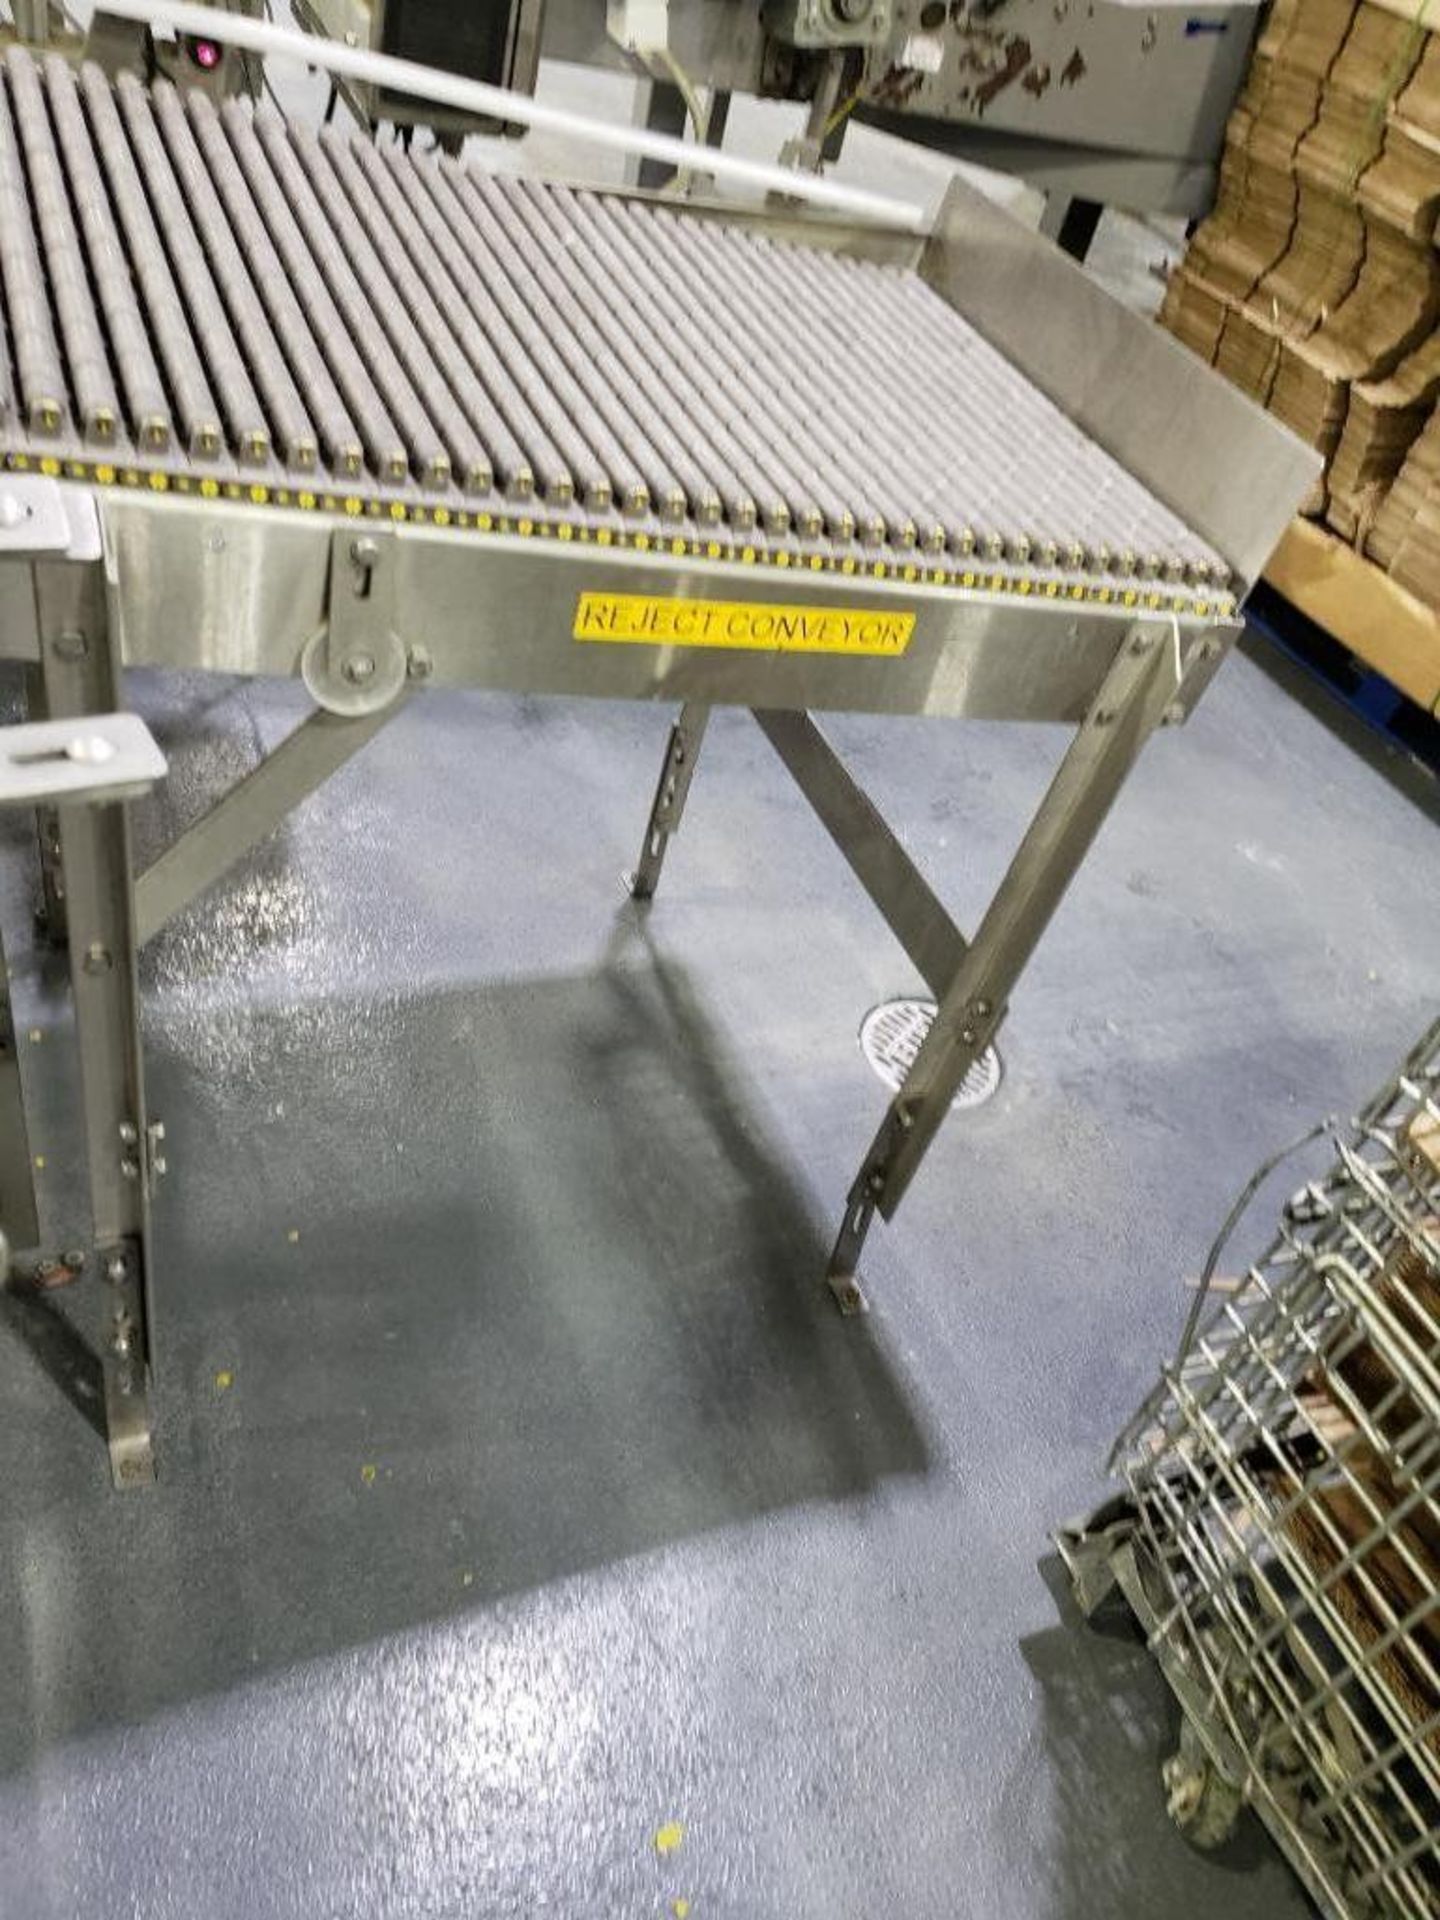 Gravity reject decline conveyor - (Located in Waseca, MN) - Image 2 of 4